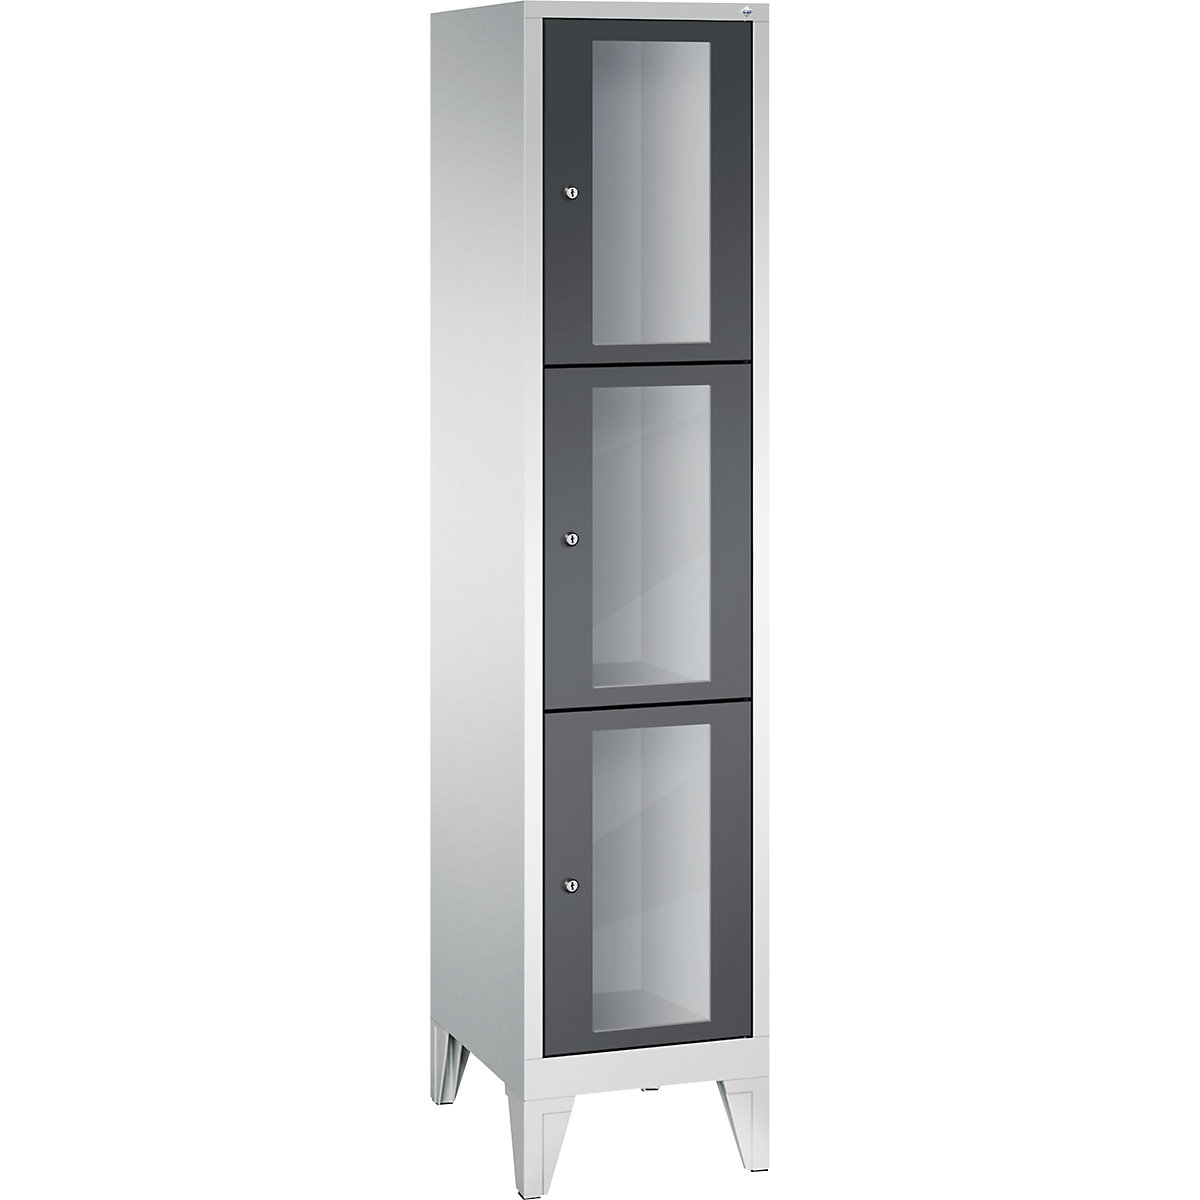 CLASSIC locker unit, compartment height 510 mm, with feet – C+P, 3 compartments, width 420 mm, black grey door-8